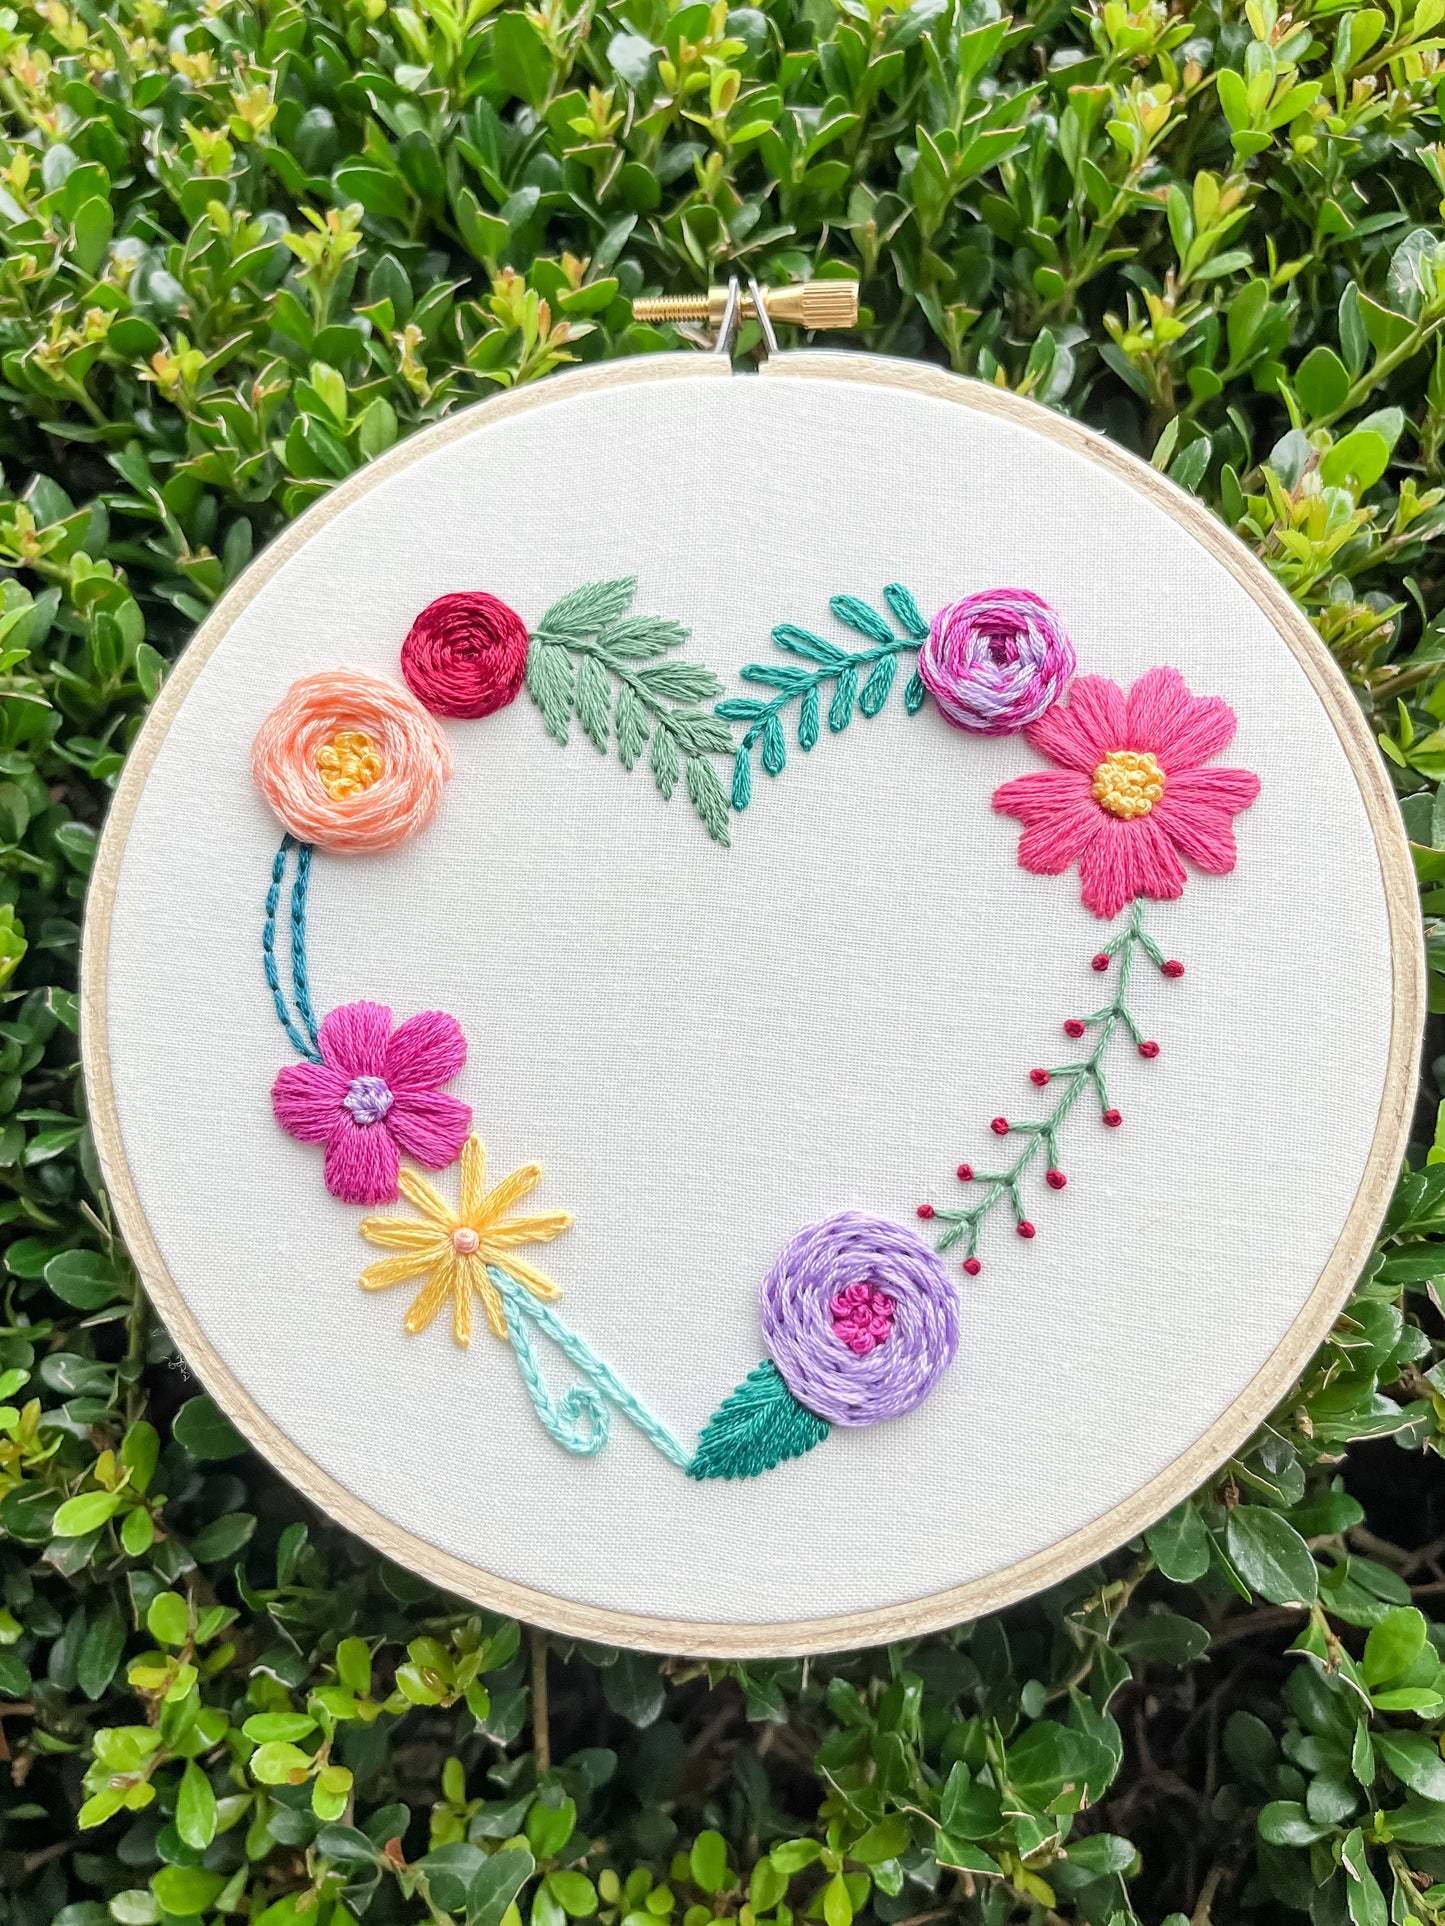 FULL KIT - Beginner's Heart Stitch Sampler/Stitch Along - DIY Embroidery Kit, Floral Embroidery, Embroidery Pattern